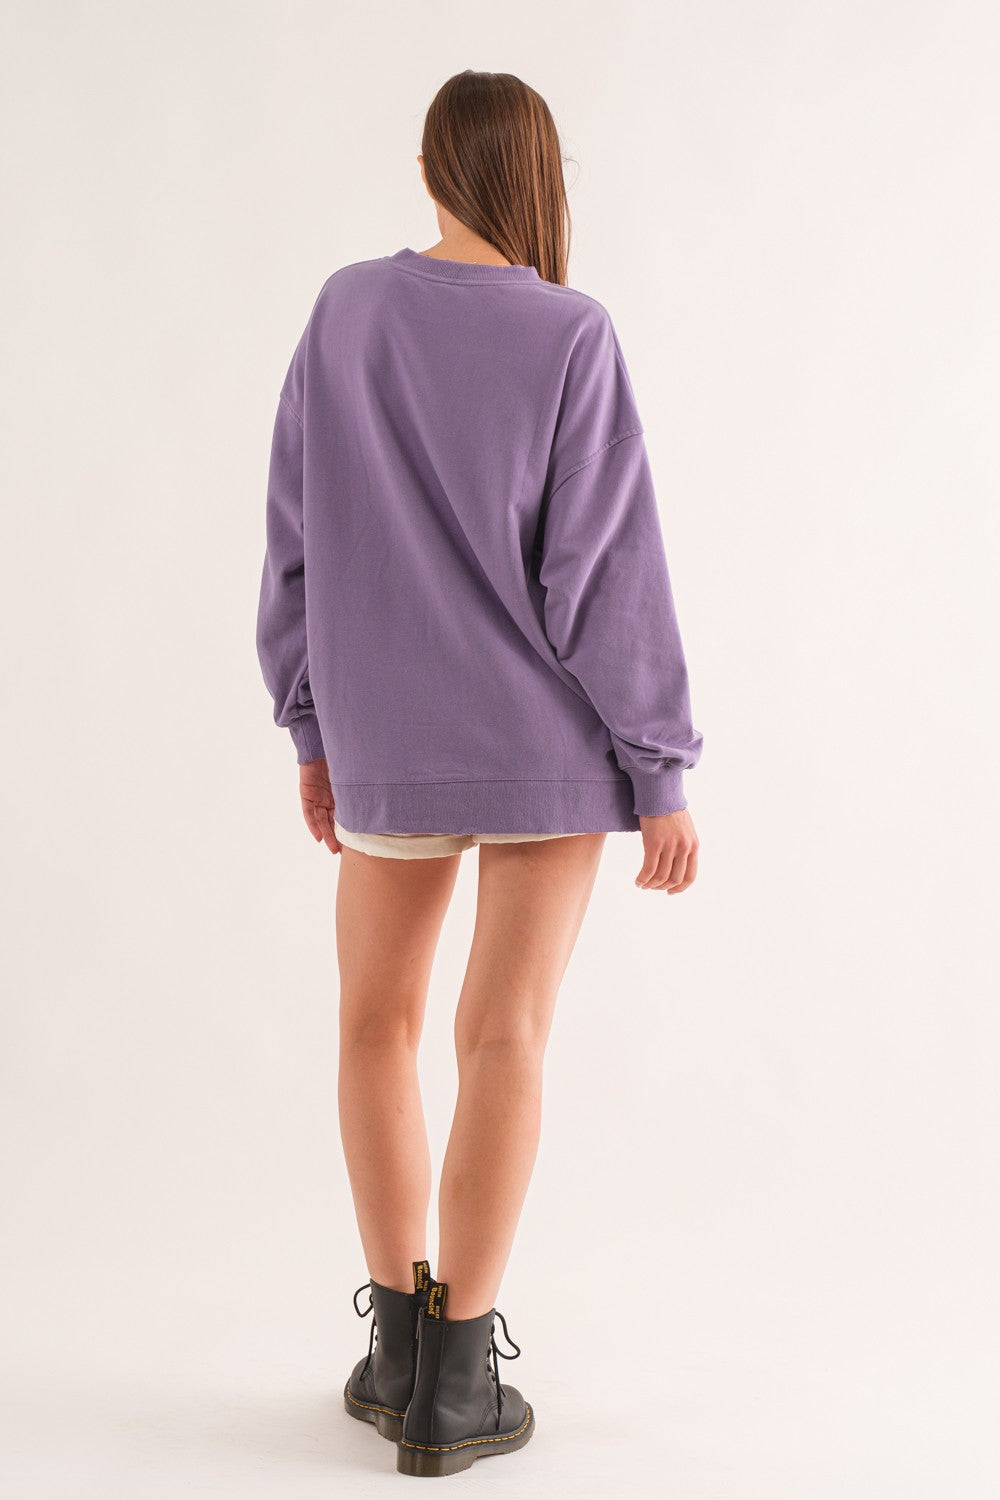 Mineral Washed Oversized Crew